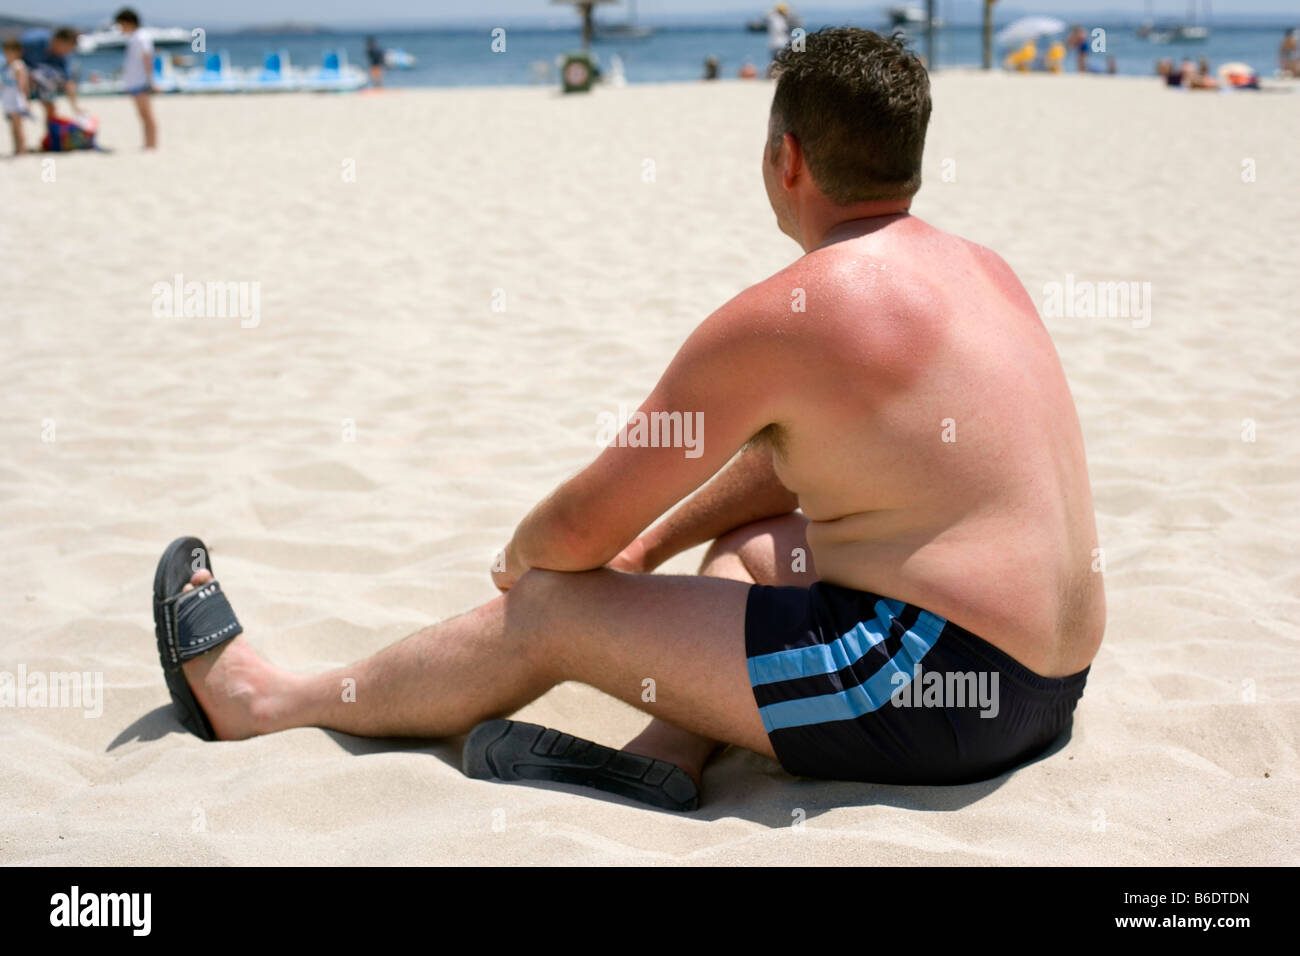 Man with sunburnt shoulders sitting on a beach. Sunburn is caused by overexposure to sunlight. Stock Photo